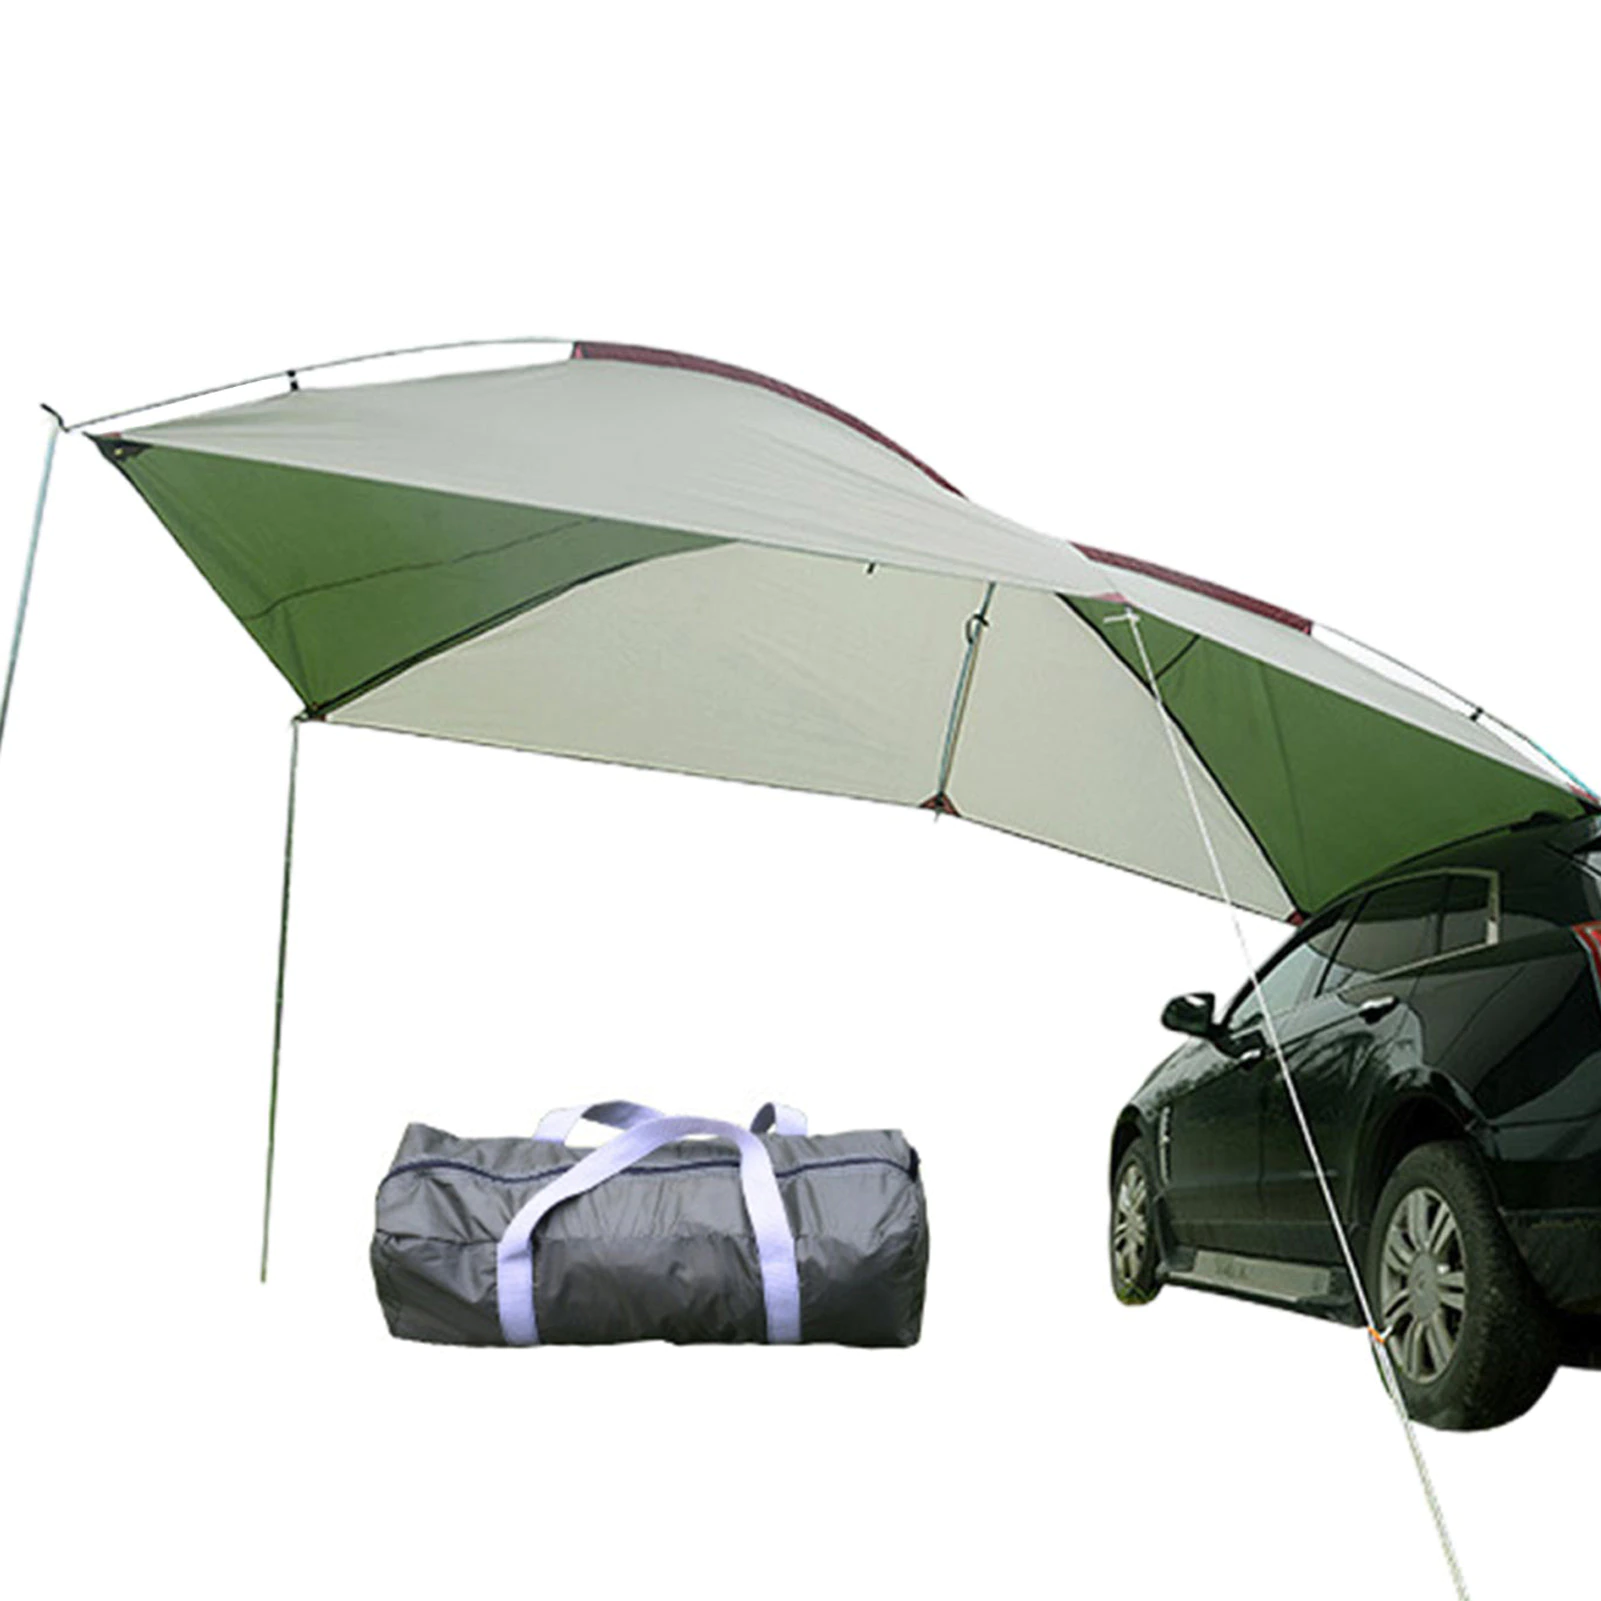 Cheap Goat Tents Car Tent Portable Waterproof Camping Shelter Car Rear Canopy Outdoor Side Canopy Sun Protection For Car Self